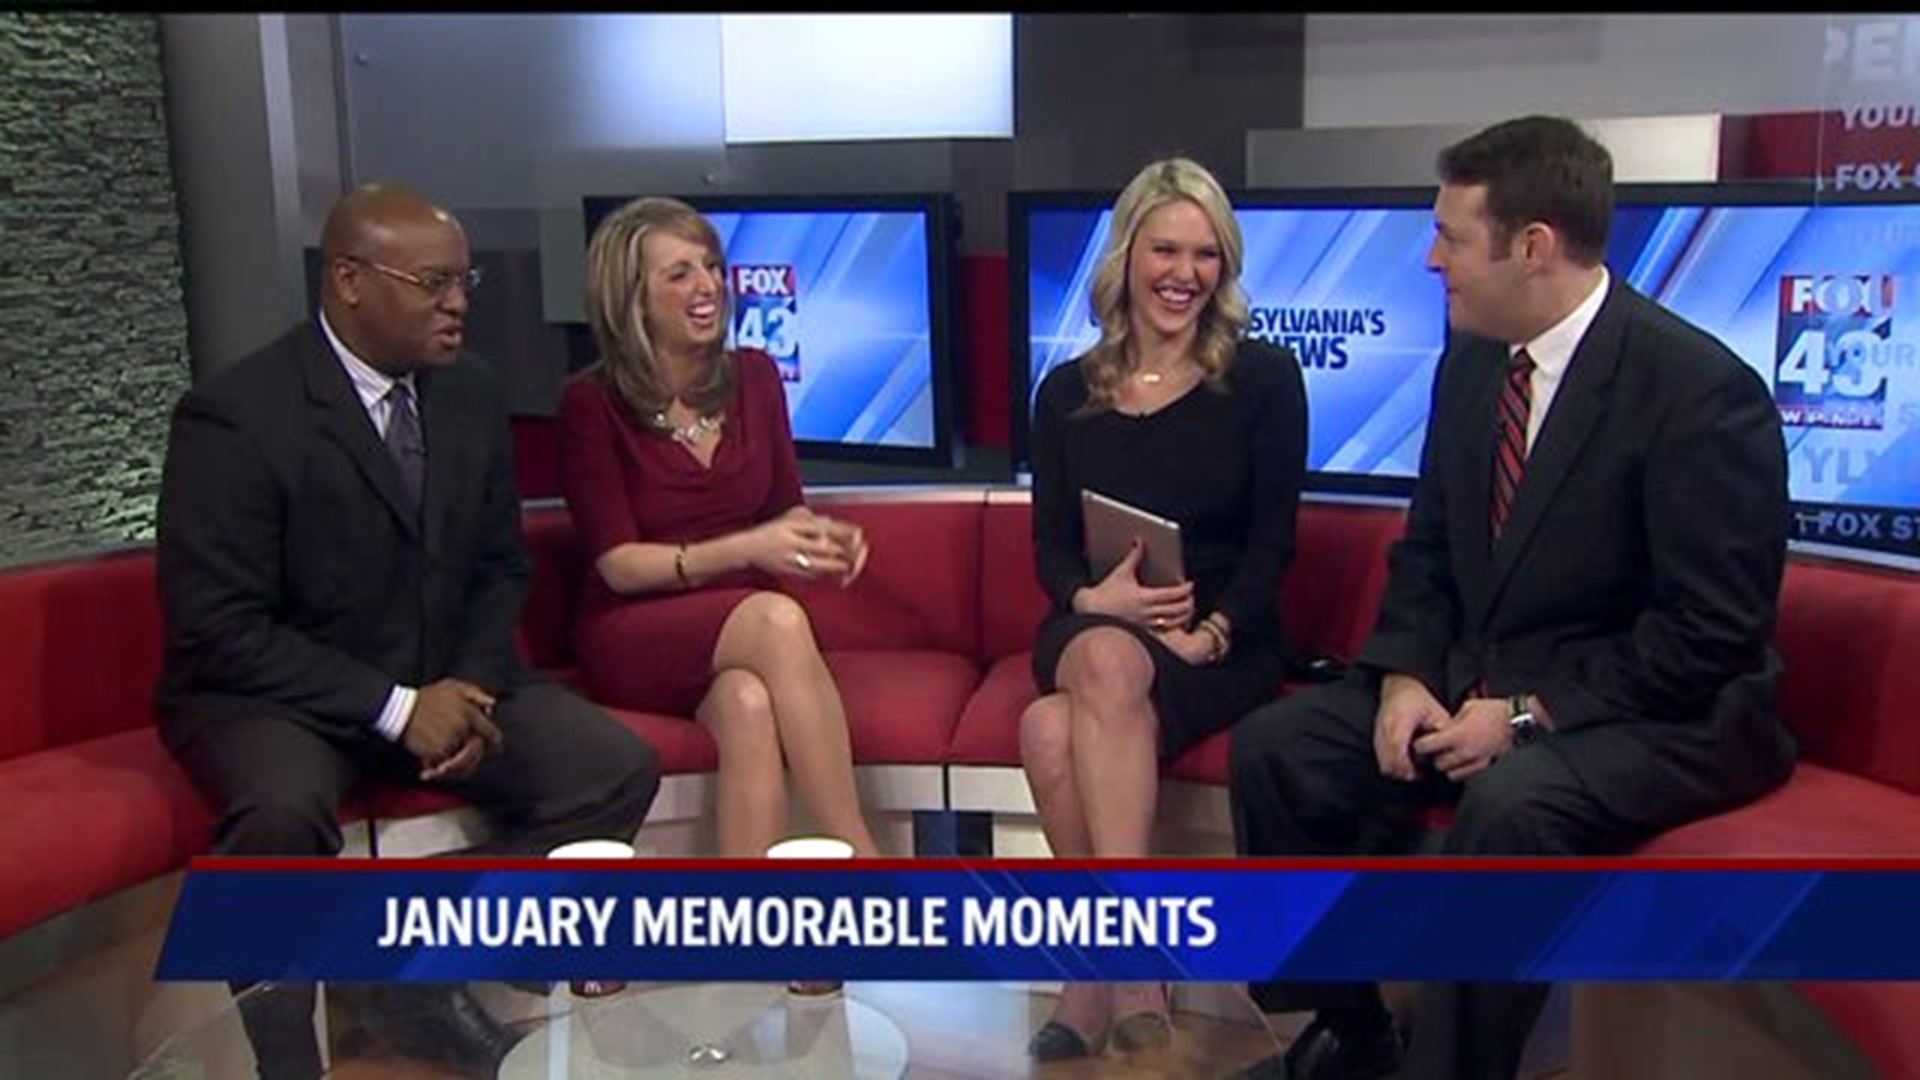 Memorable Moments from FOX43 Morning News January 2015